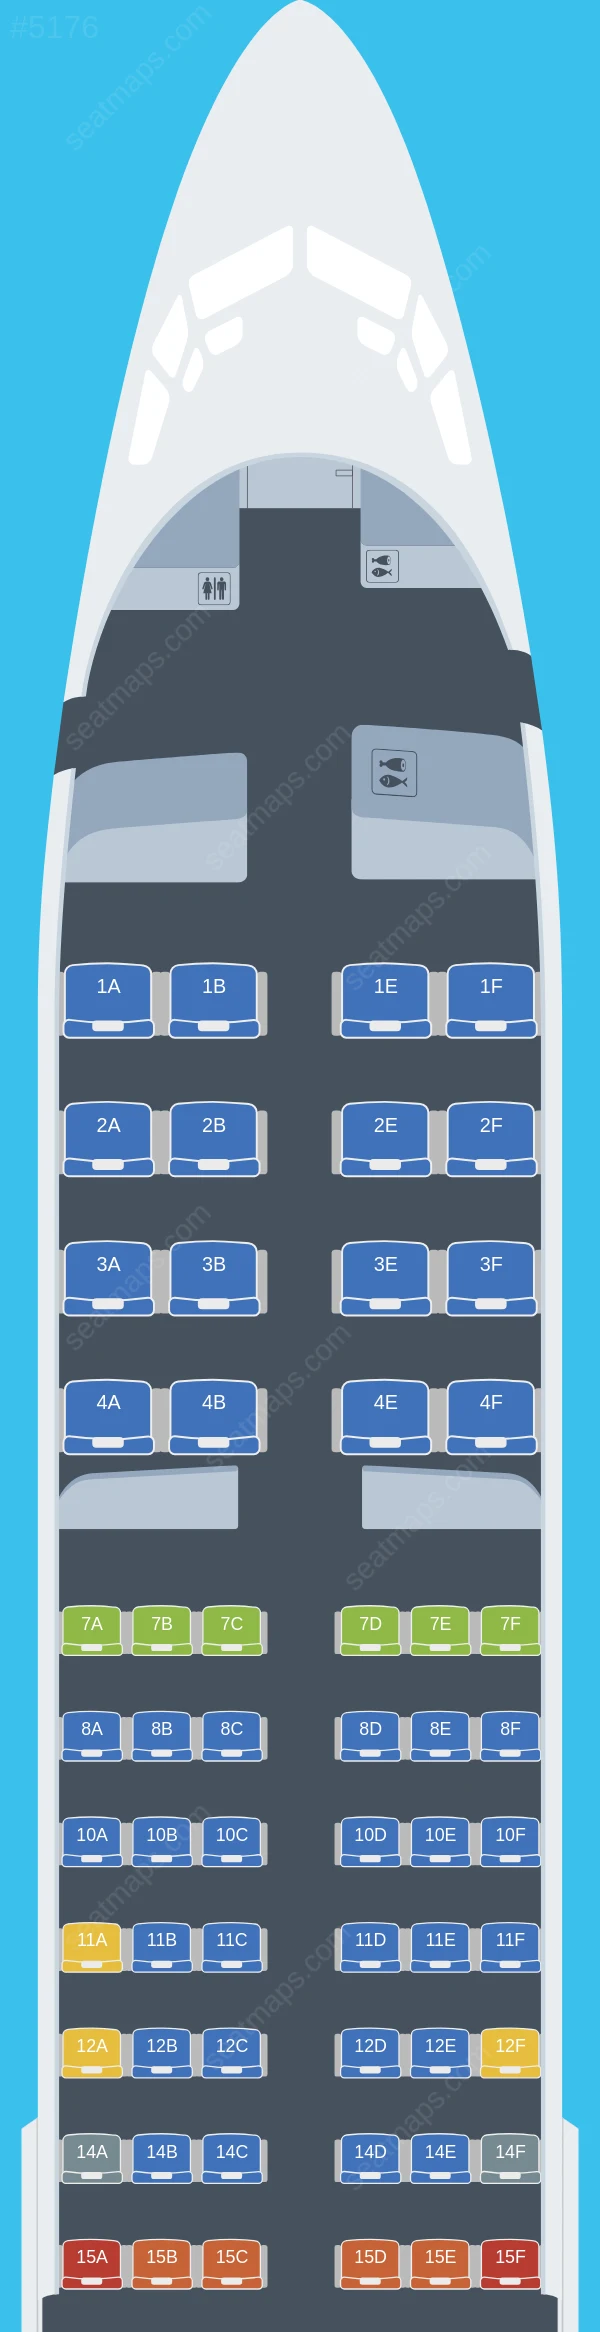 United Boeing 737-800 V.3 seatmap preview